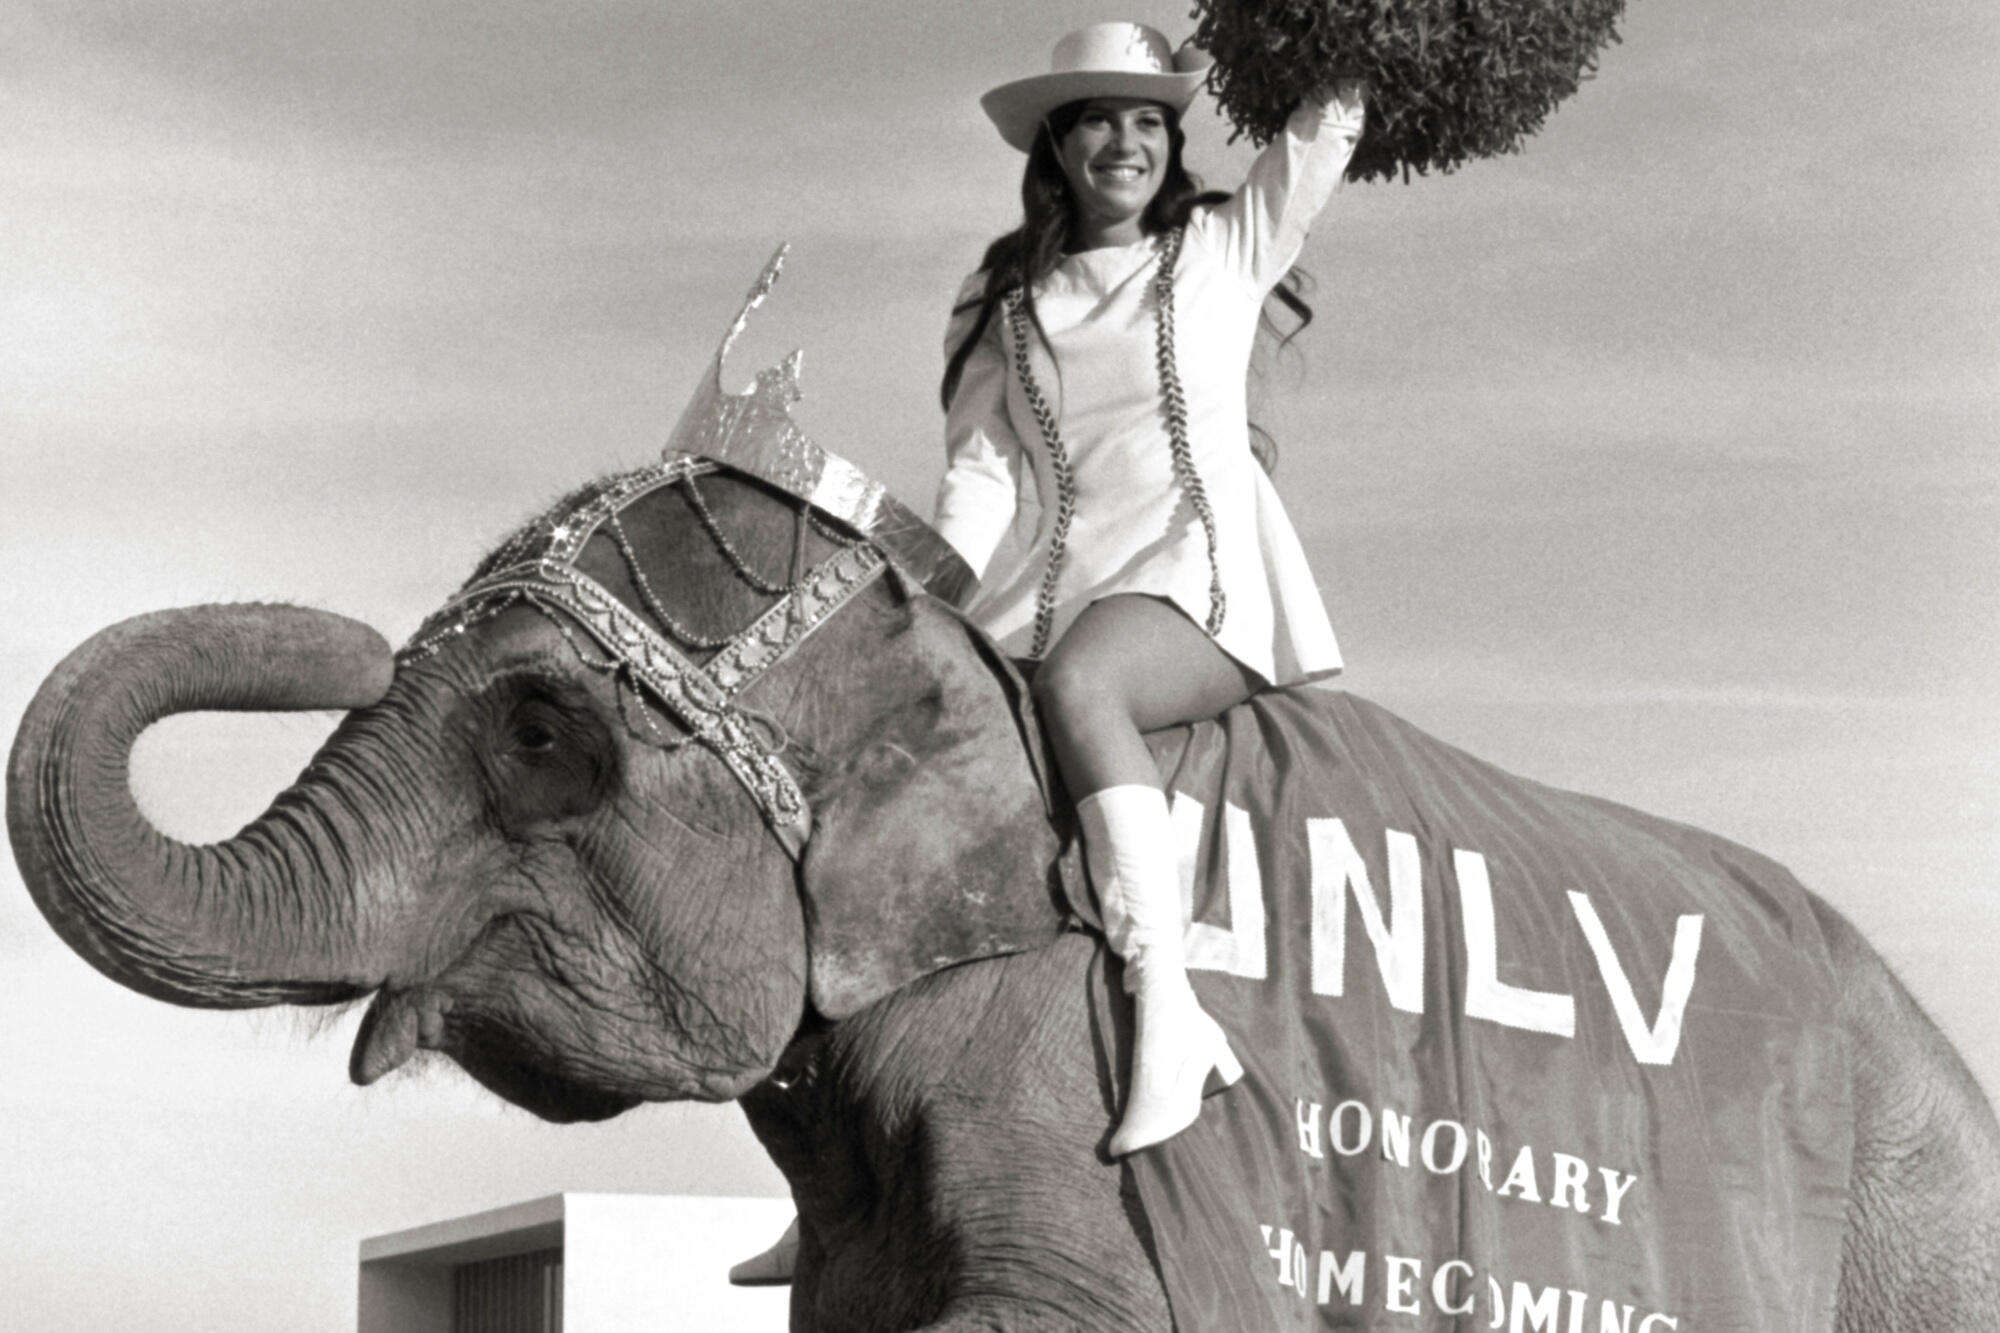 A really big deal. Tanya the Elephant (an entertainer from Circus Circus) became the 1971 honorary homecoming queen. Pictured here, Bonnie Braiker-Gordon, a member of UNLV's drill team, accompanies Tanya during the celebration.